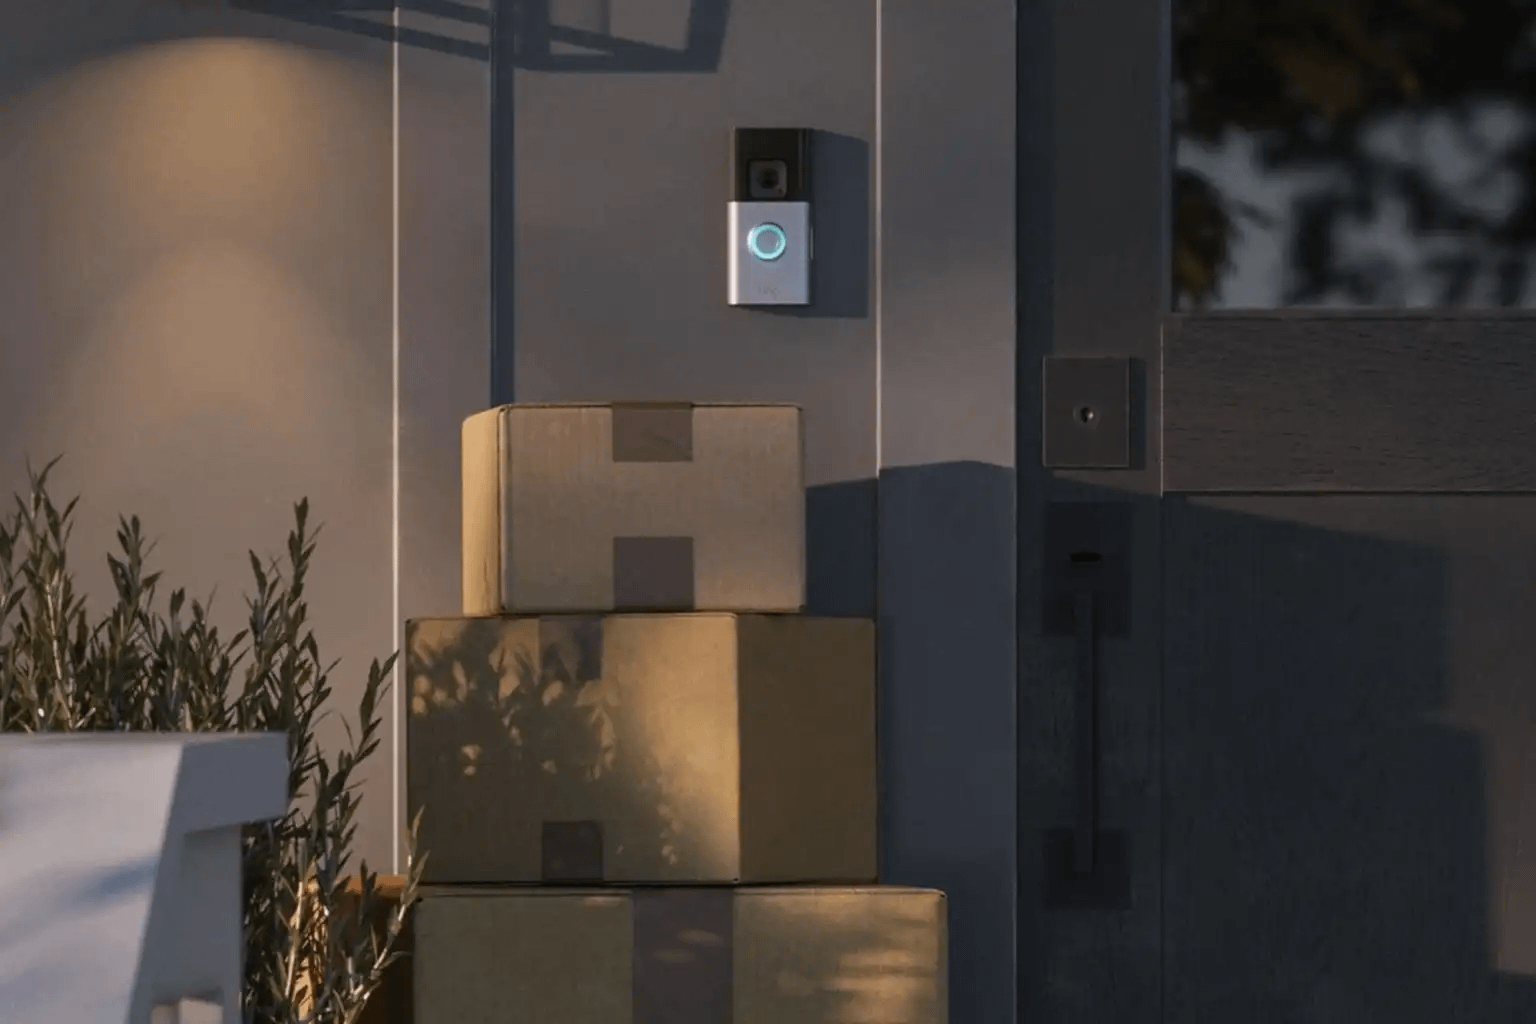 Ring Battery Doorbell Pro adds radar-powered motion detection.